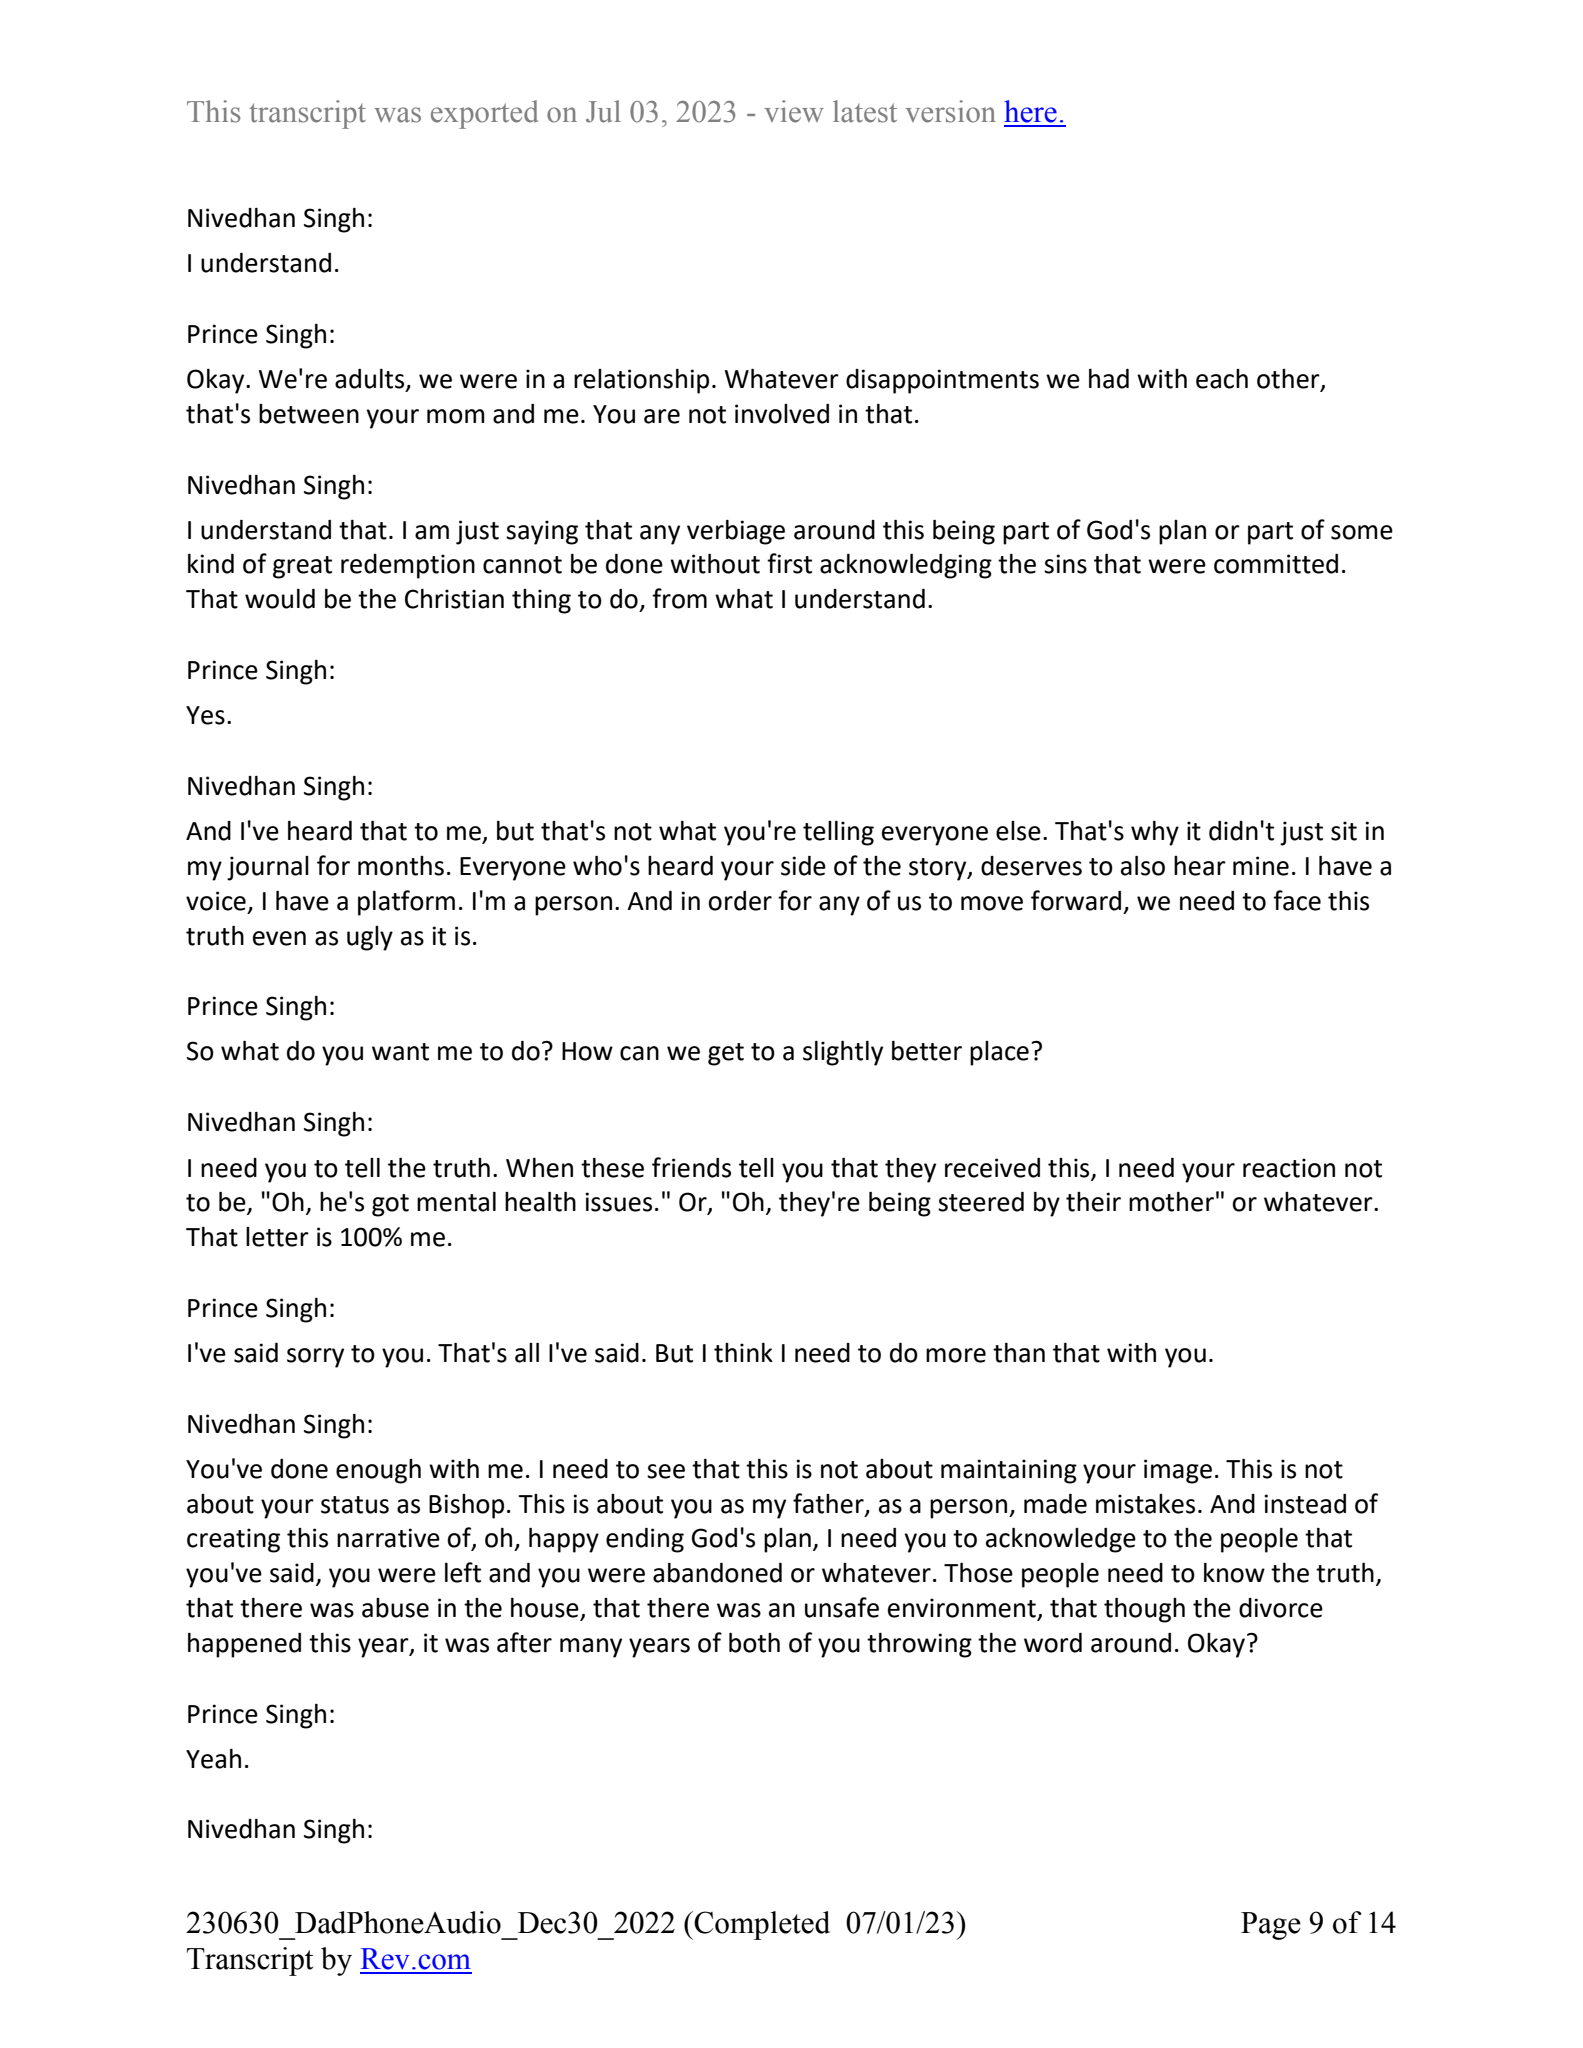 December 30th, 2022 phone call transcript - Page 9